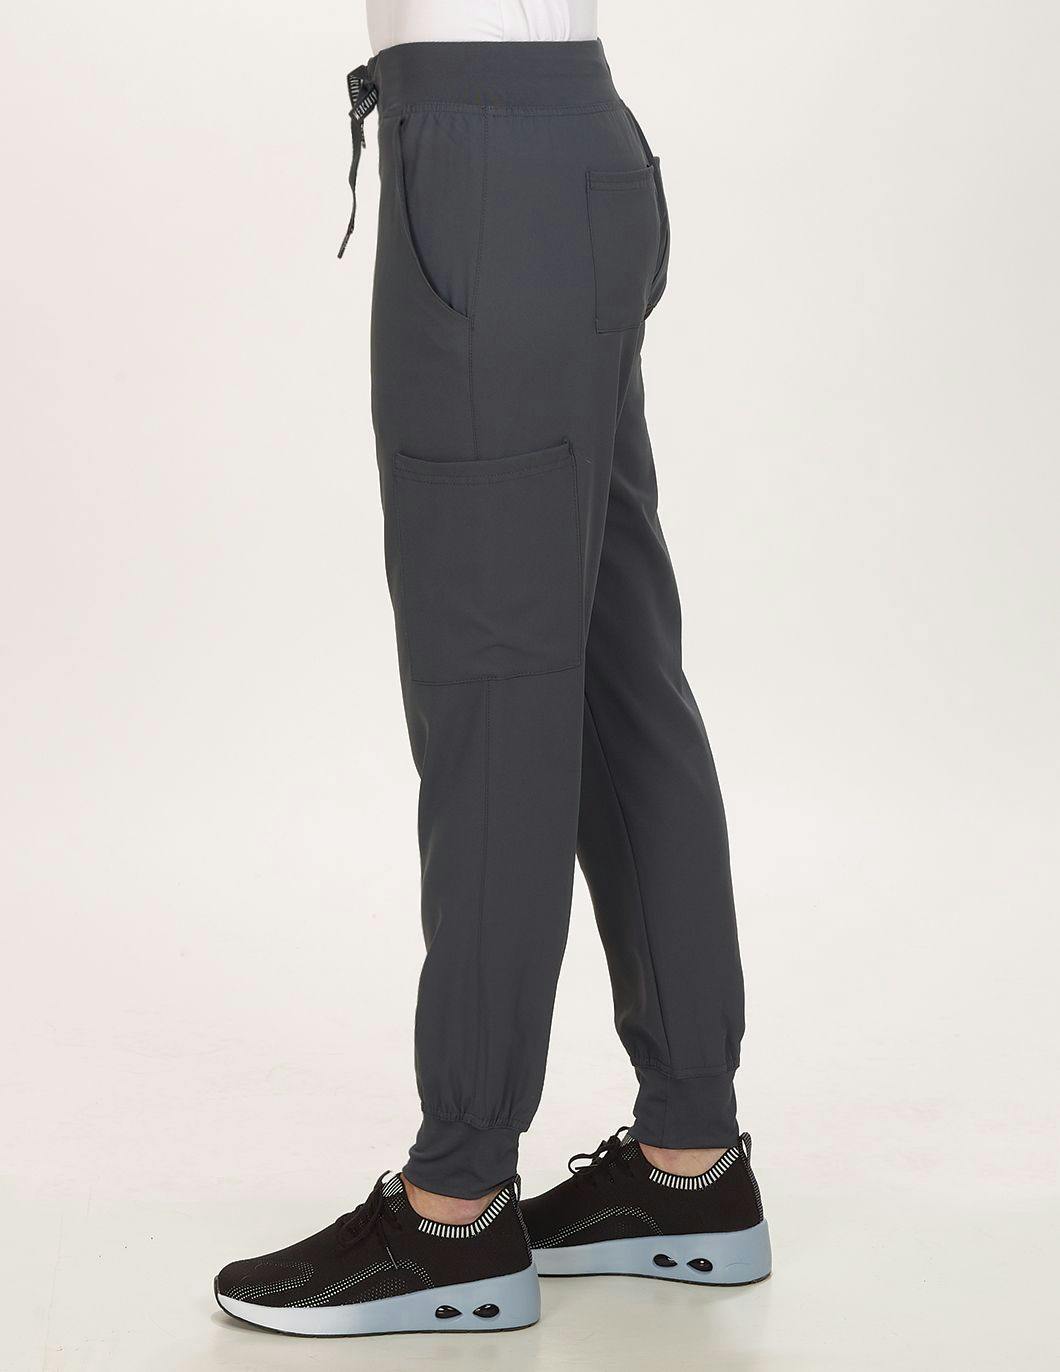 Med-Couture-Insight-Womens-Drawstring-Jogger-Scrub-Pant-Side